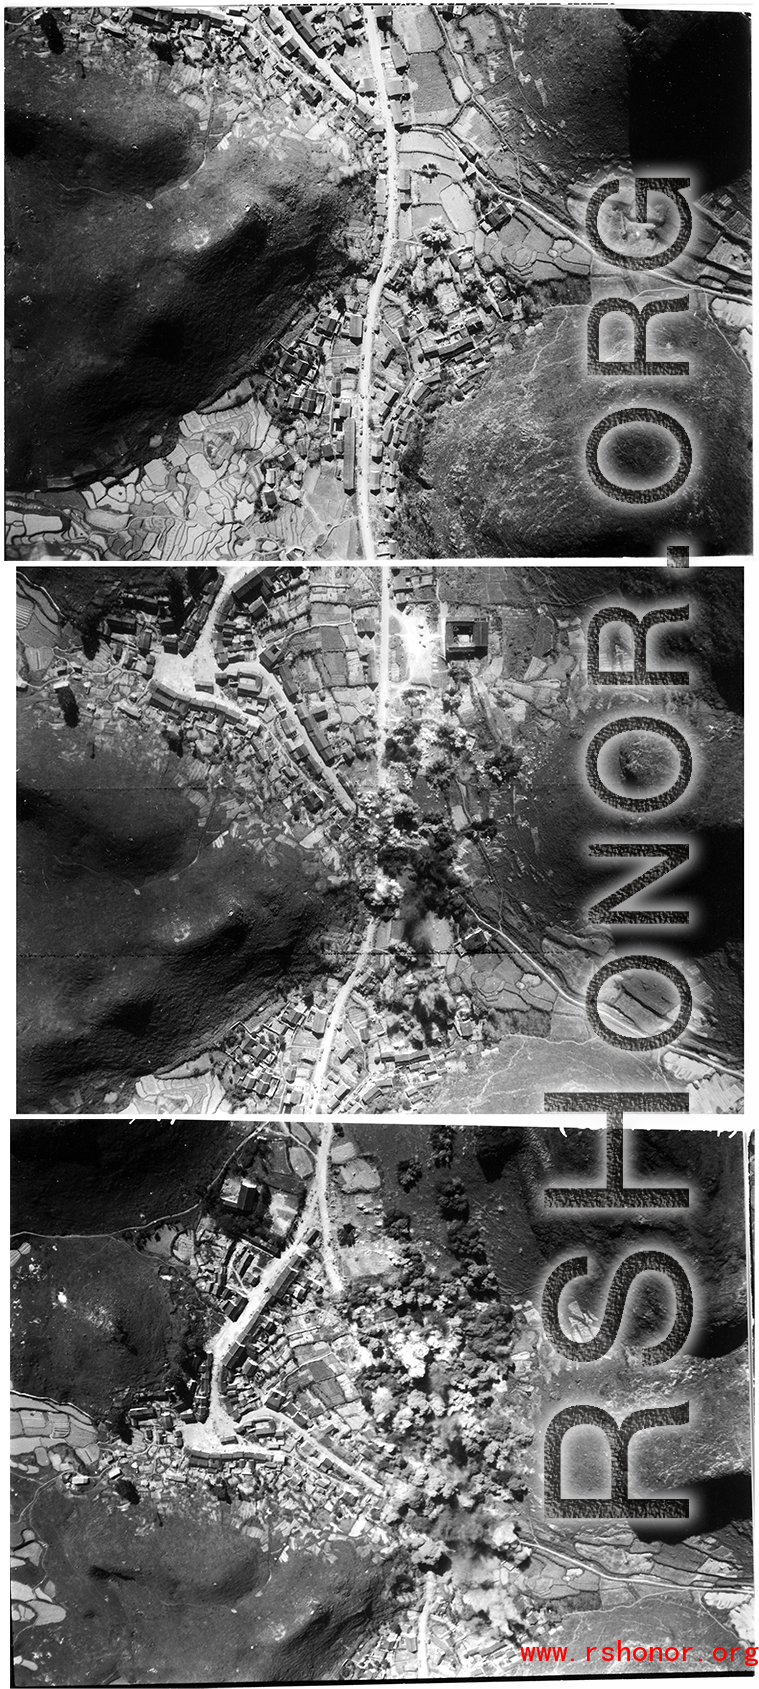 In these three images, we see a small town in Guangxi Province, SW China, being bombed by American B-25 bombers. In the succession of images we see the progress of the bombing.   In the first image, just as the first bombs hit, one can see a few trucks of a Japanese convoy sparsely about the town, and a few people milling or running around (see blown up image below). Most likely these are exclusively Japanese soldiers, as usually Chinese civilians would flee towns in front of the Japanese whenever they coul